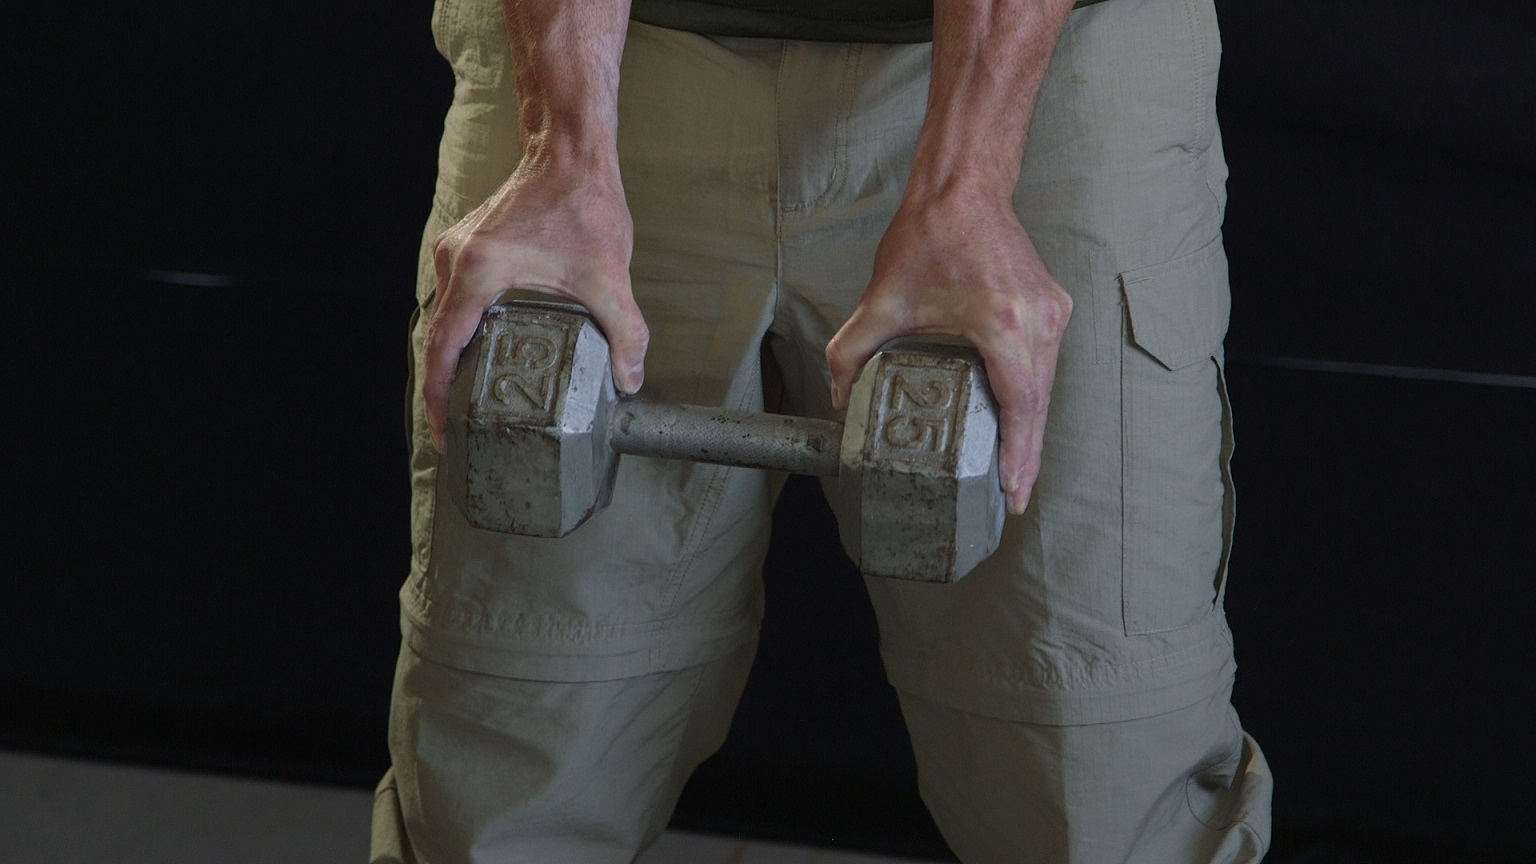 Part 5: Closed Pinch Grip Training product featured image thumbnail.